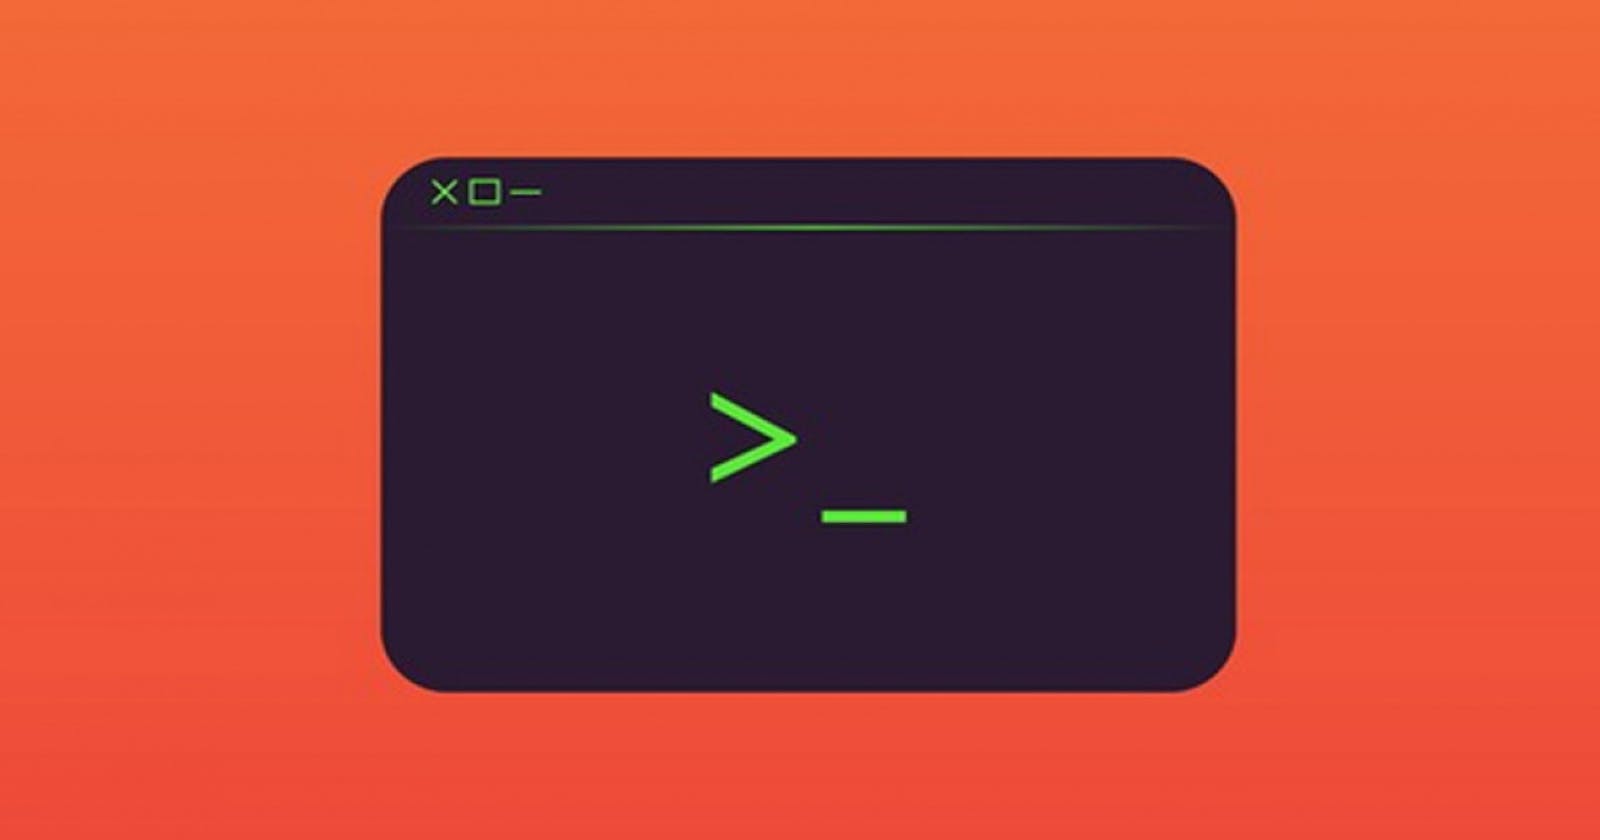 How To Build CLI App In Rust Using Clap - Part 4